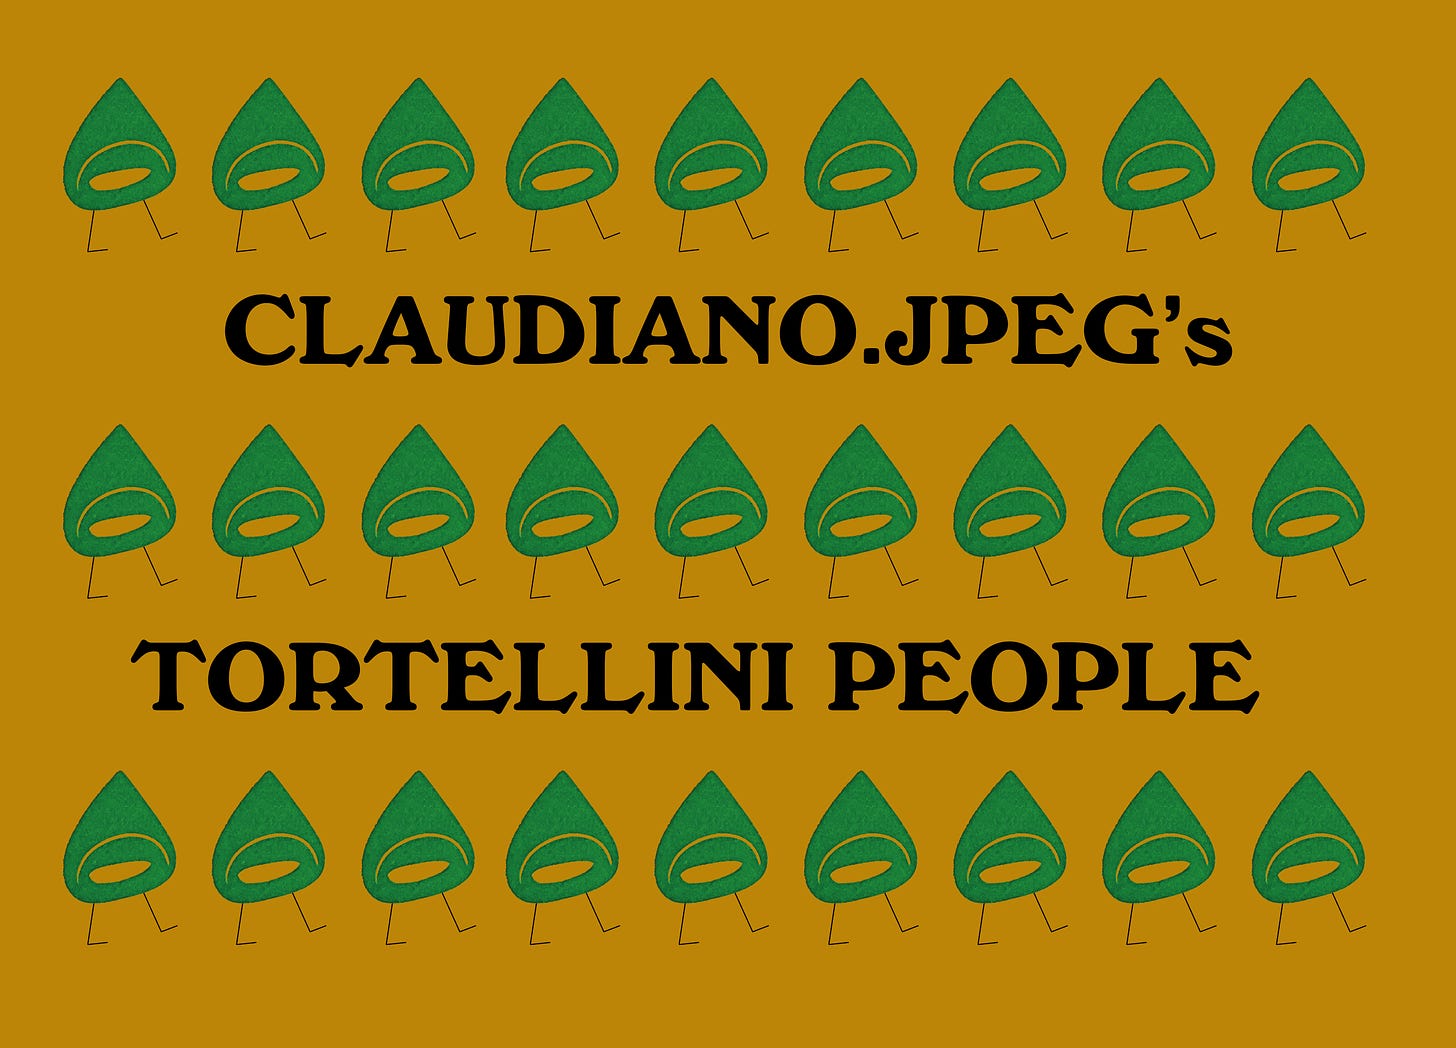 Three rows of illustrated tortellini along with the text "Claudiano.jpeg's Tortellini People"